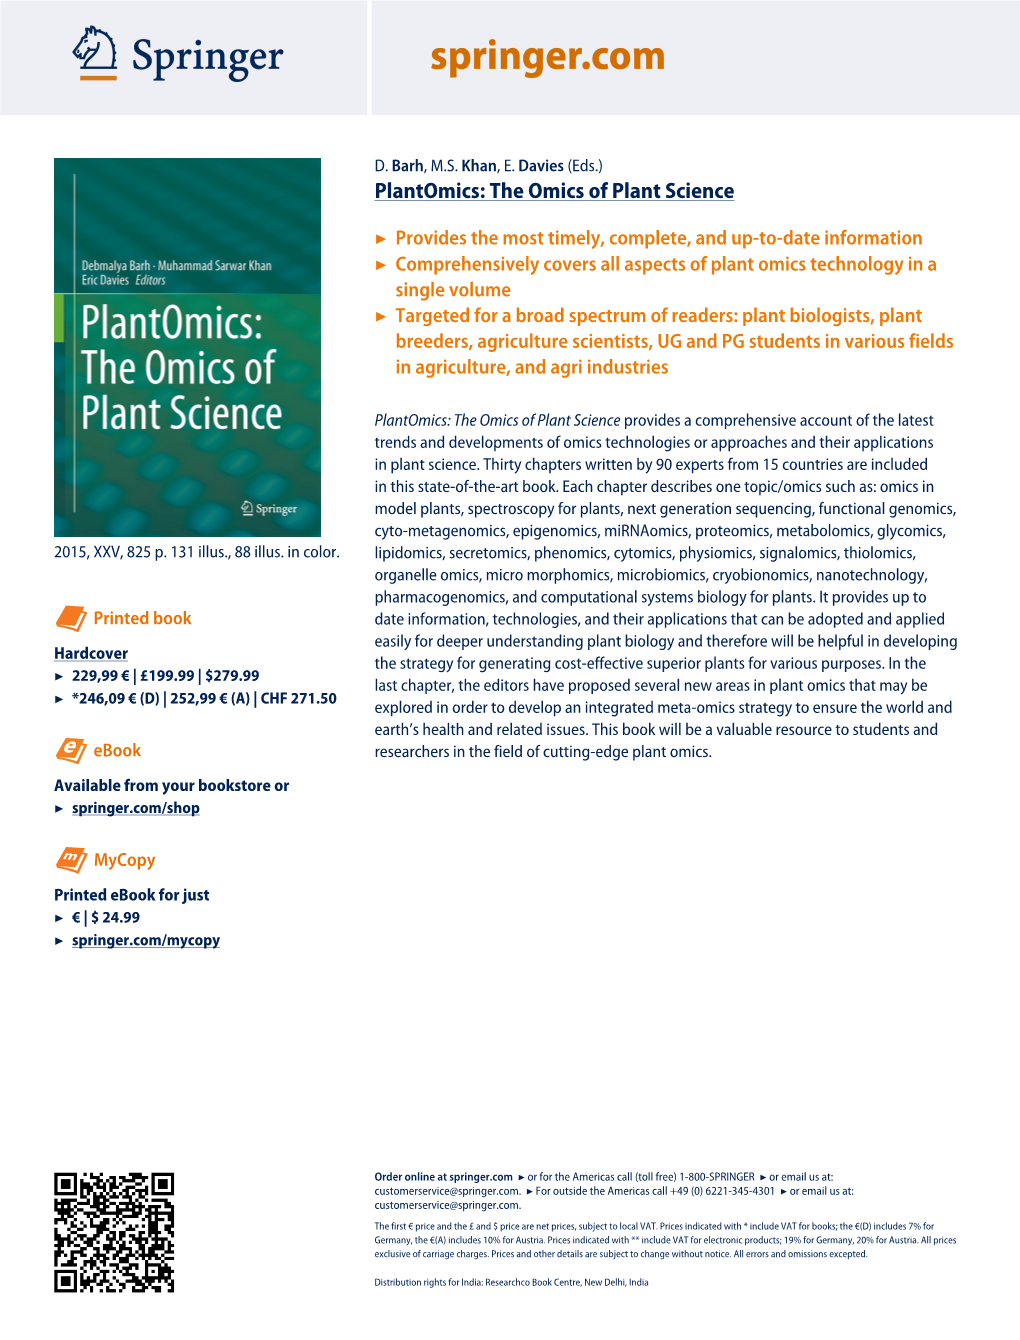 The Omics of Plant Science